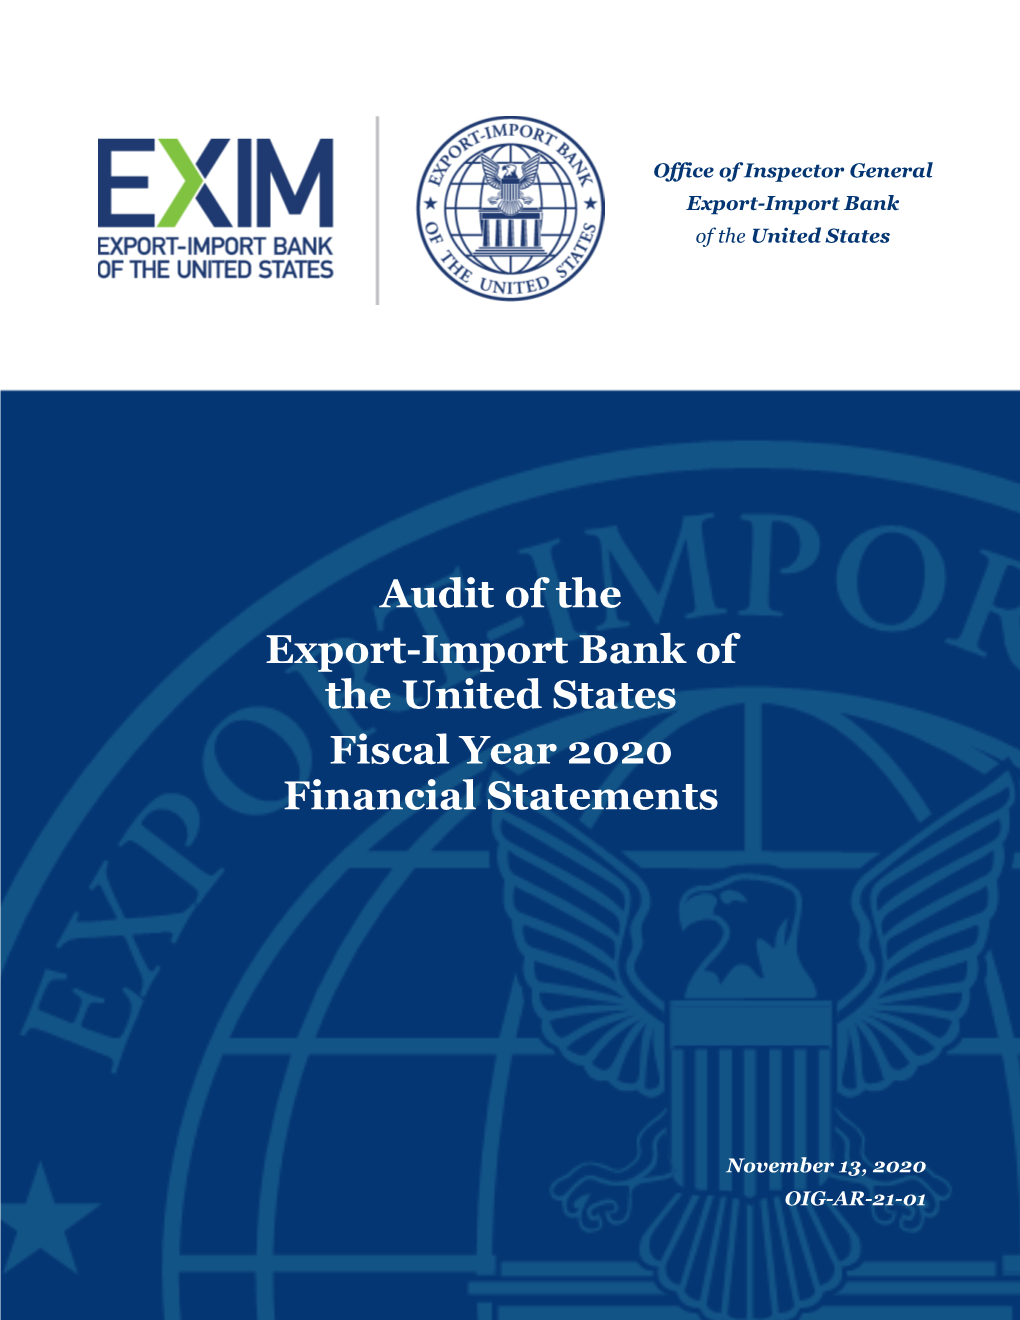 Audit of the Export-Import Bank of the United States Fiscal Year 2020 Financial Statements